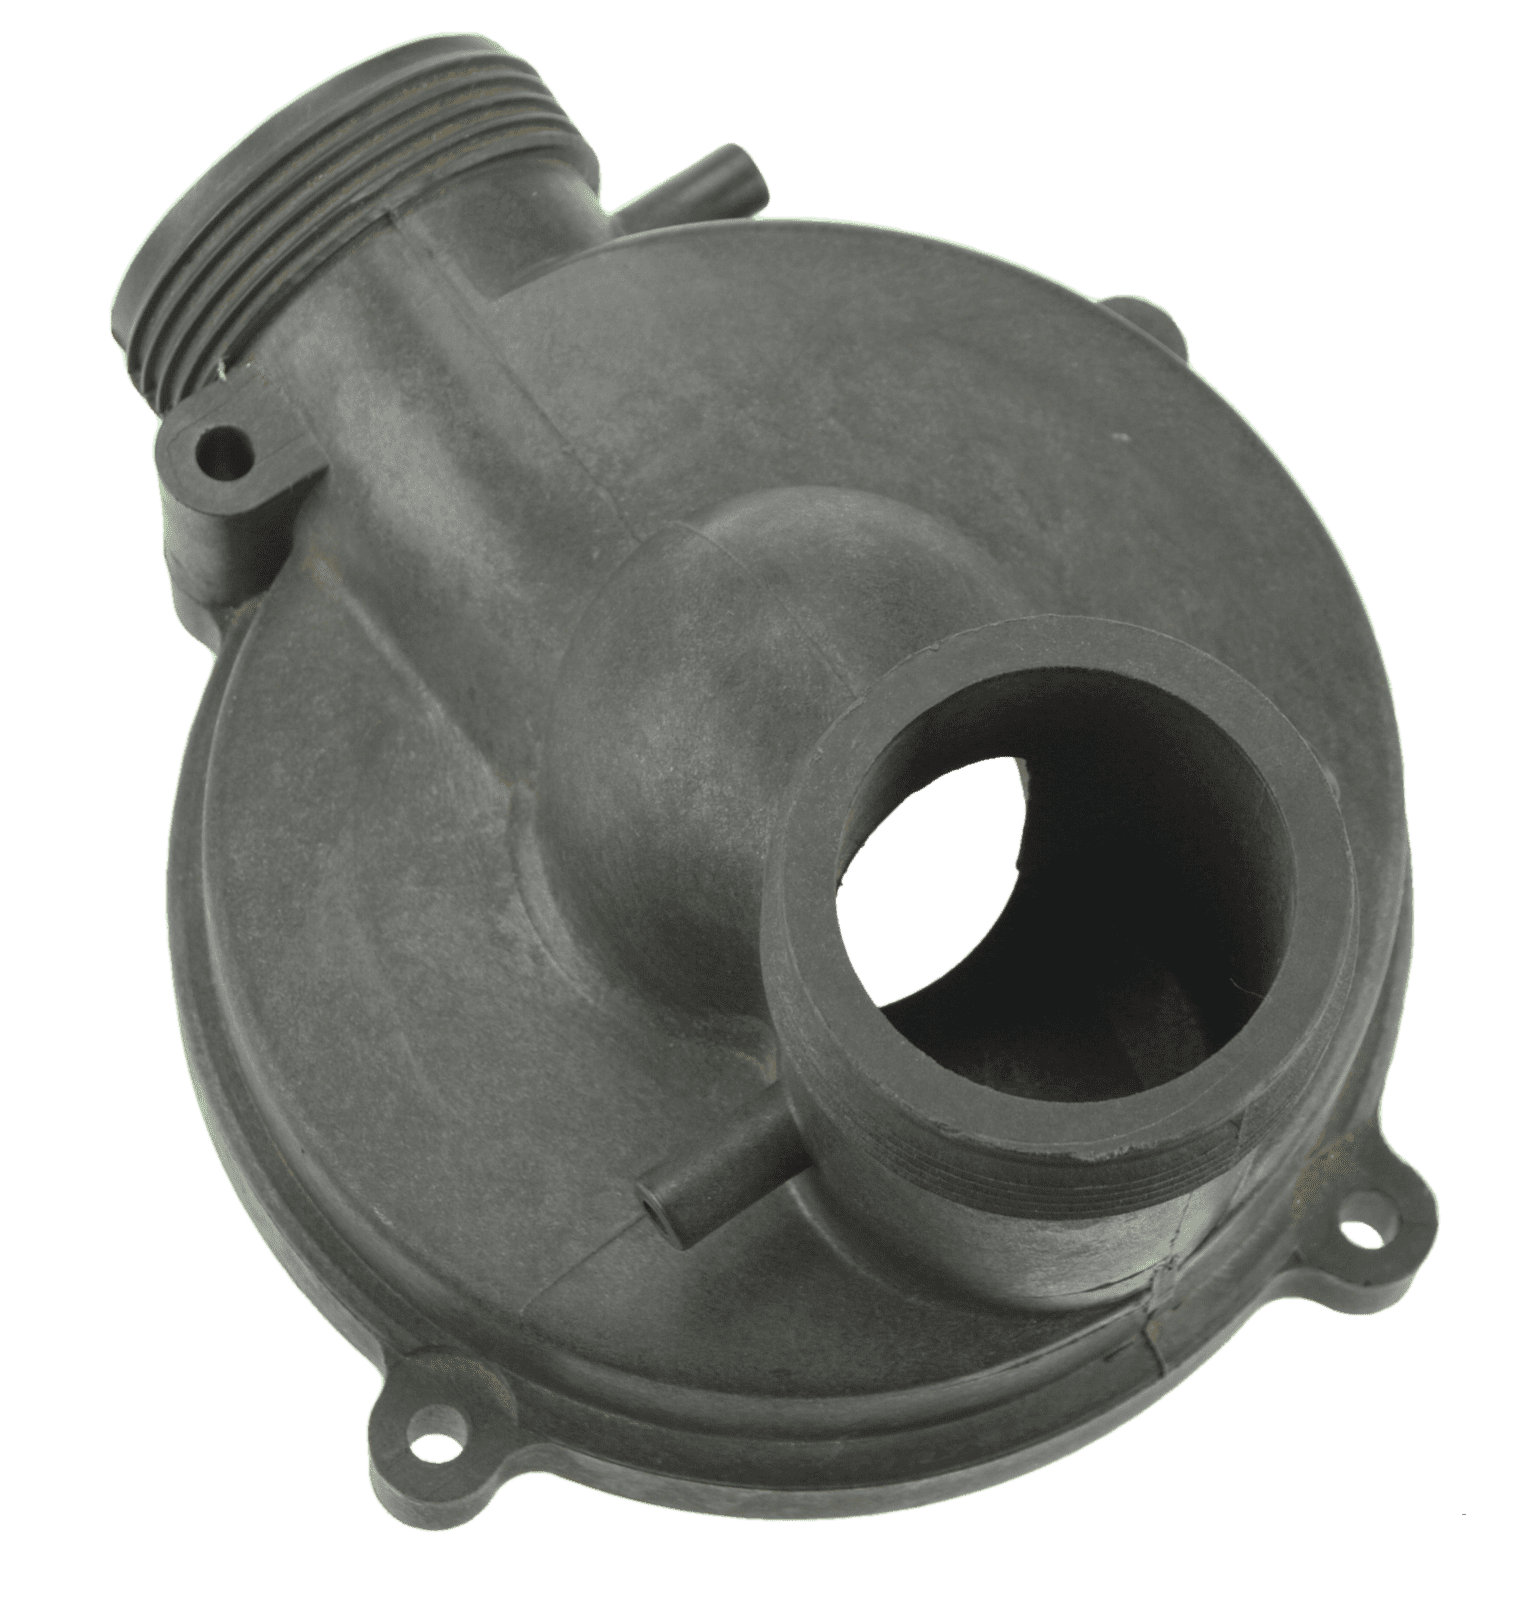 Balboa Vico Ultima Circulation Pump Front Housing Body - Self Draining: High-quality replacement part